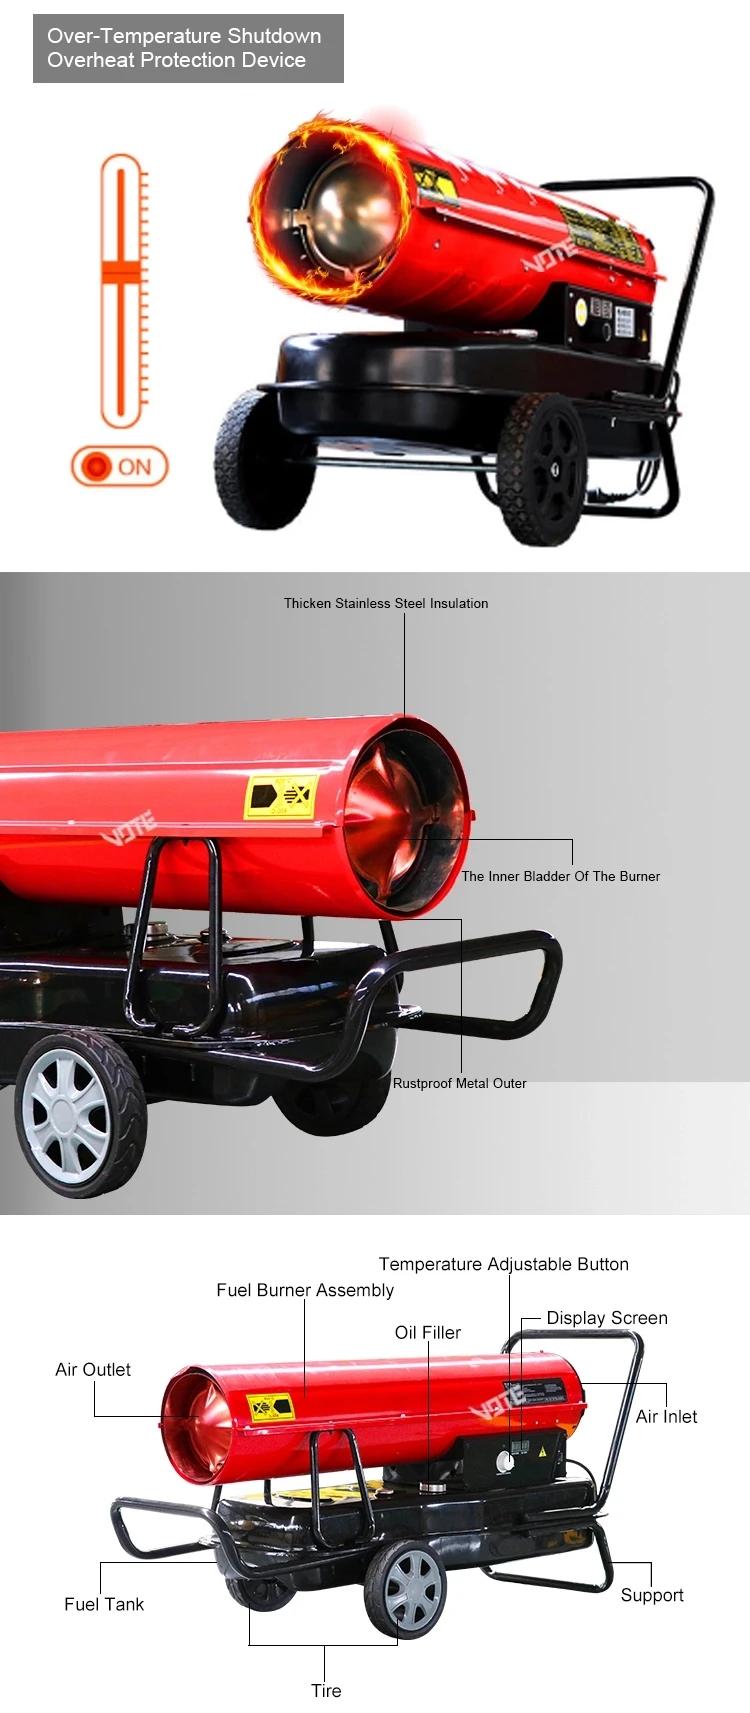 Freestanding Heating Electric New Industrial Diesel air Heater Portable Heater Industrial Air Heater